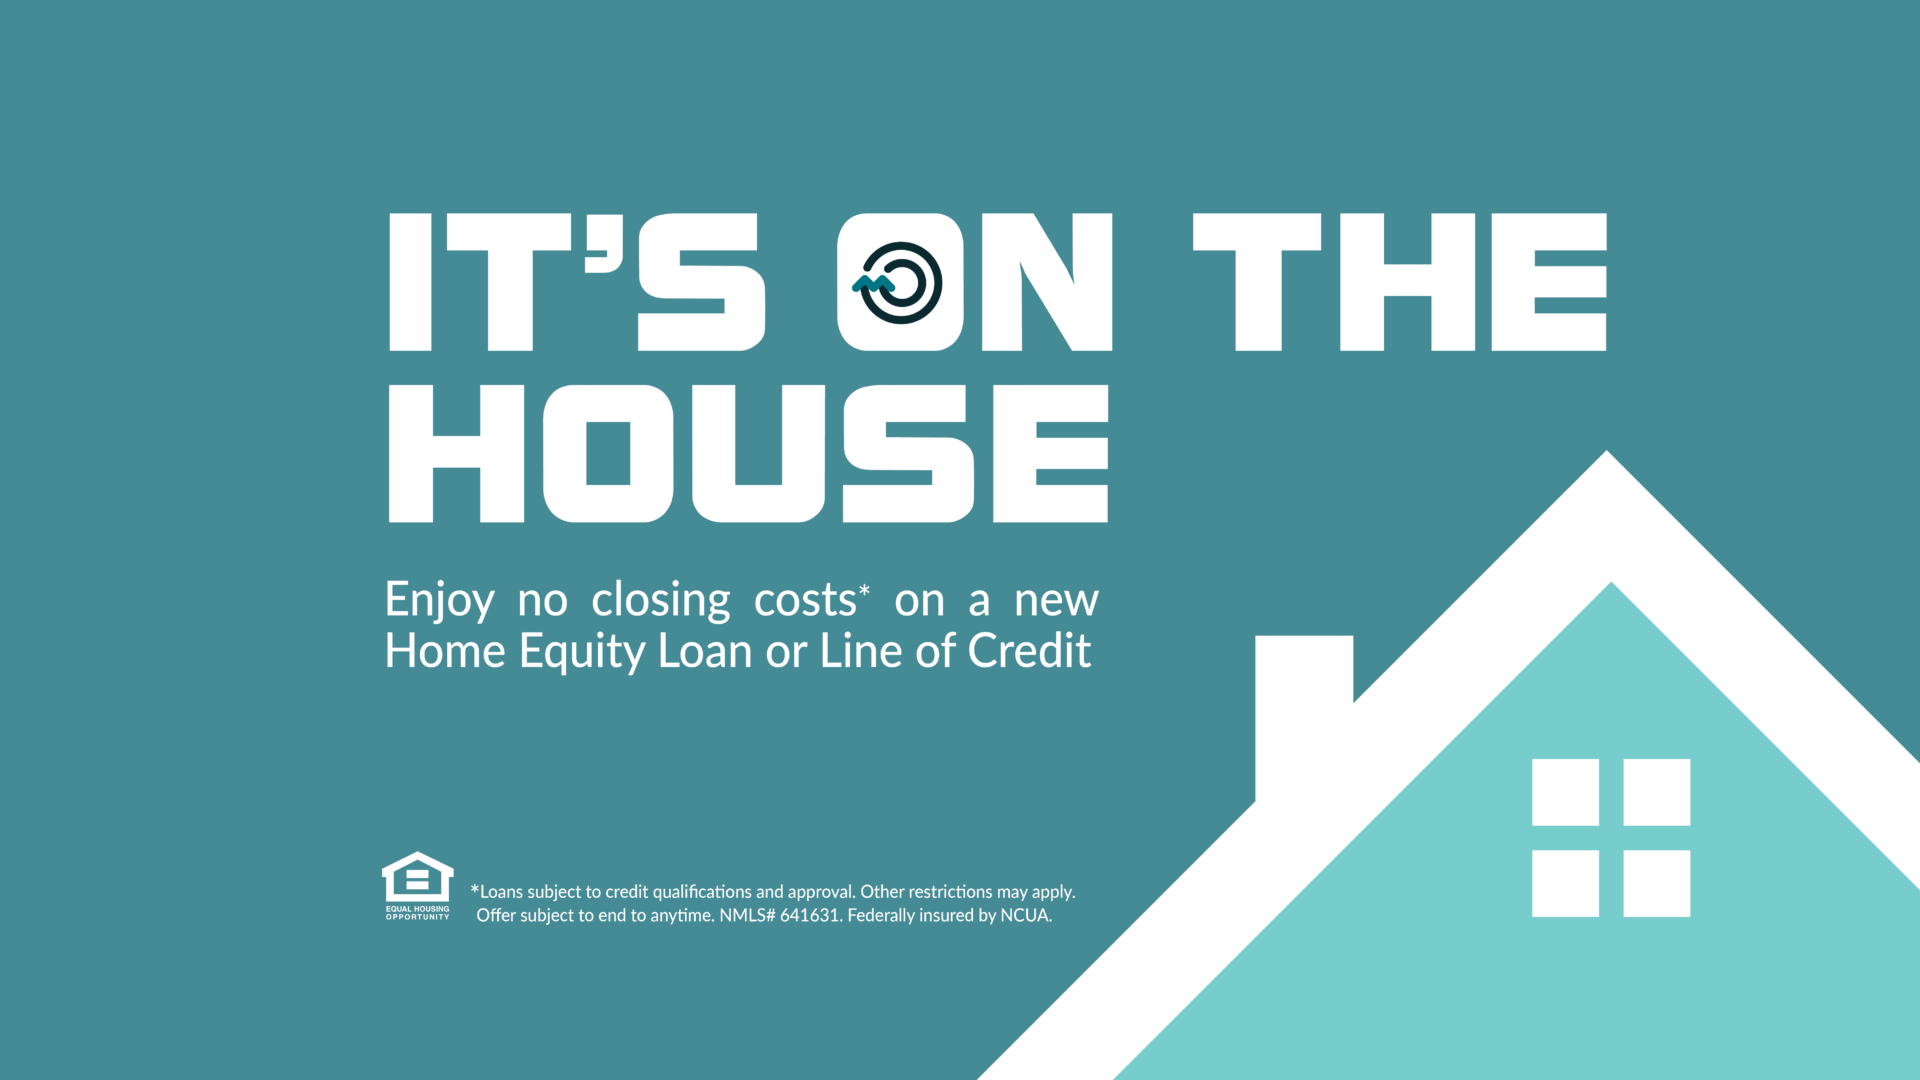 It's on the house. Enjoy no closing costs on new home equity loans or lines of credit. Exclusions may apply. Click for more info or to apply.